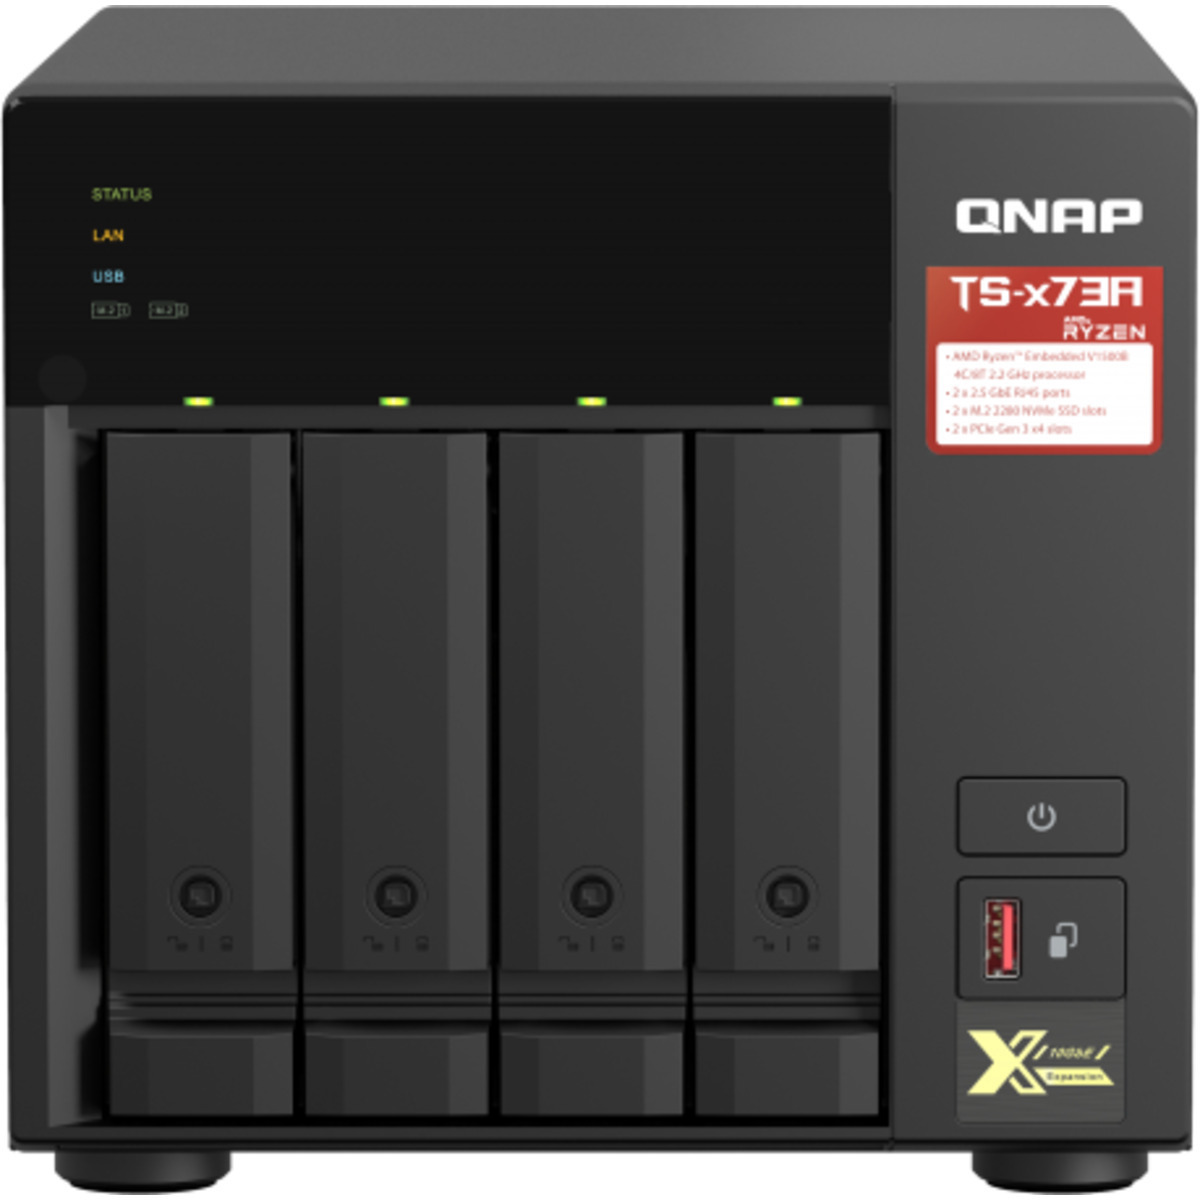 QNAP TS-473A 40tb 4-Bay Desktop Multimedia / Power User / Business NAS - Network Attached Storage Device 4x10tb Western Digital Red Plus WD101EFBX 3.5 7200rpm SATA 6Gb/s HDD NAS Class Drives Installed - Burn-In Tested TS-473A